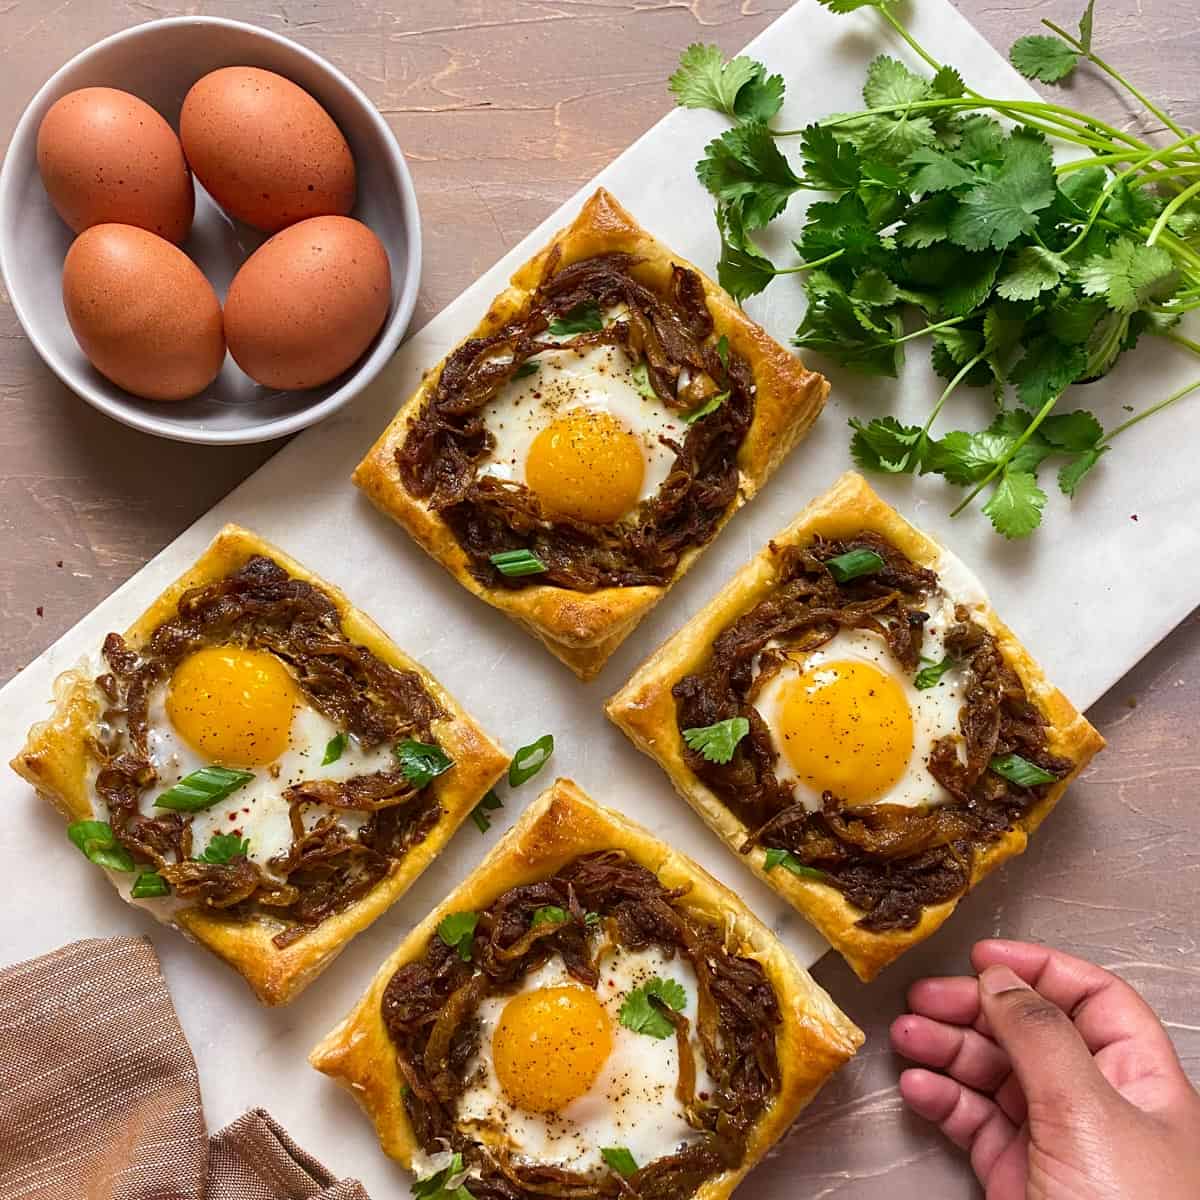 Caramelized onion masala tarts on a cutting board with a hand reaching for one